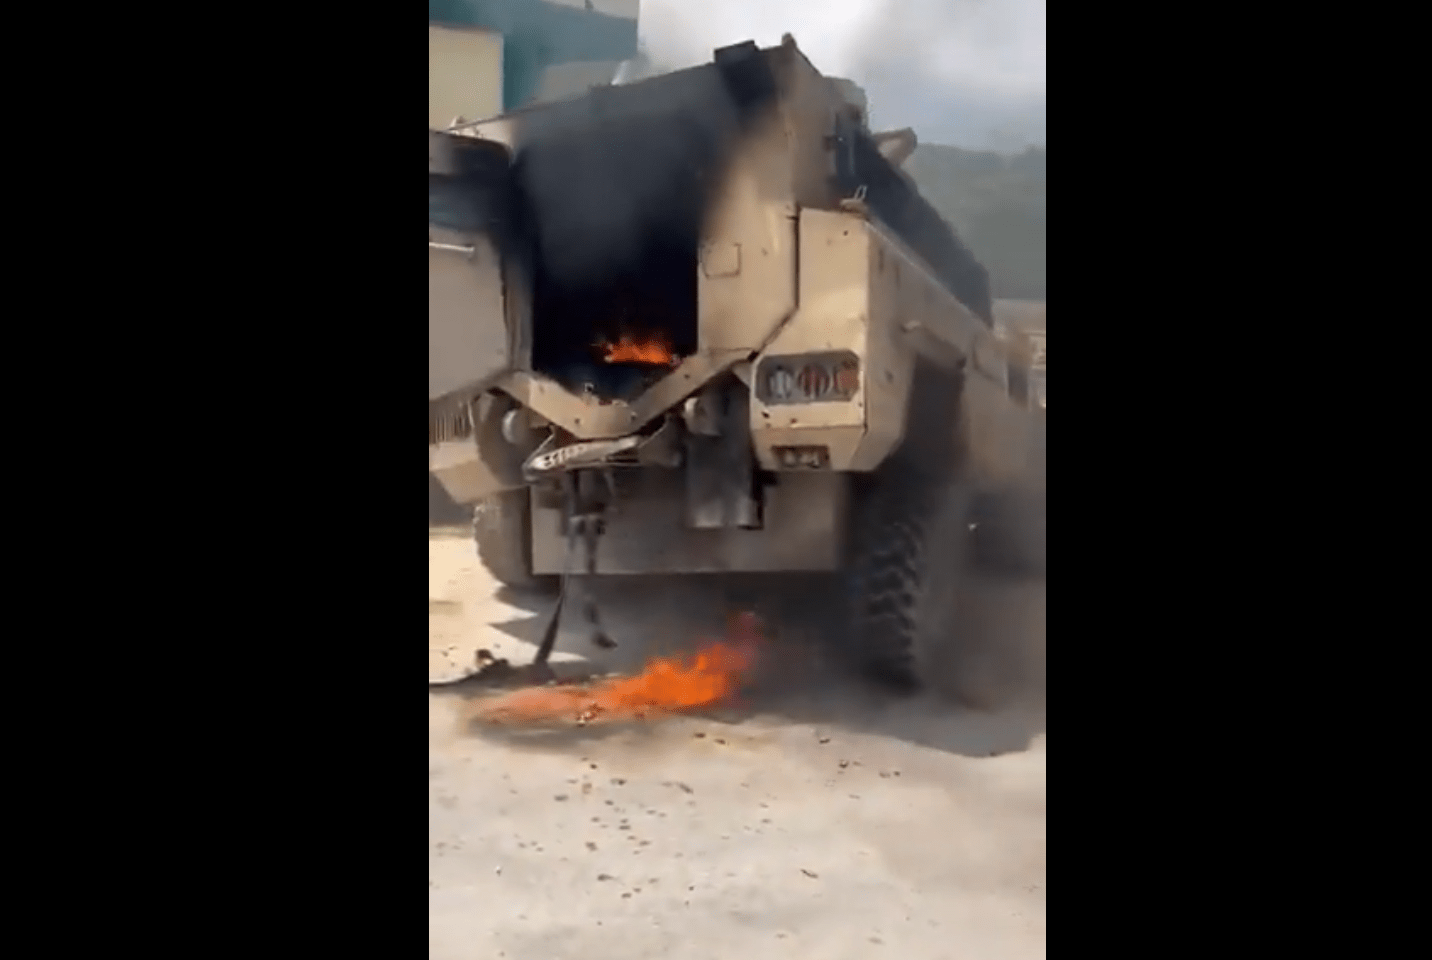 gressier:-an-armored-pnh-vehicle-set-on-fire-by-gangs,-confusion-over-the-victims-in-a-deserted-town